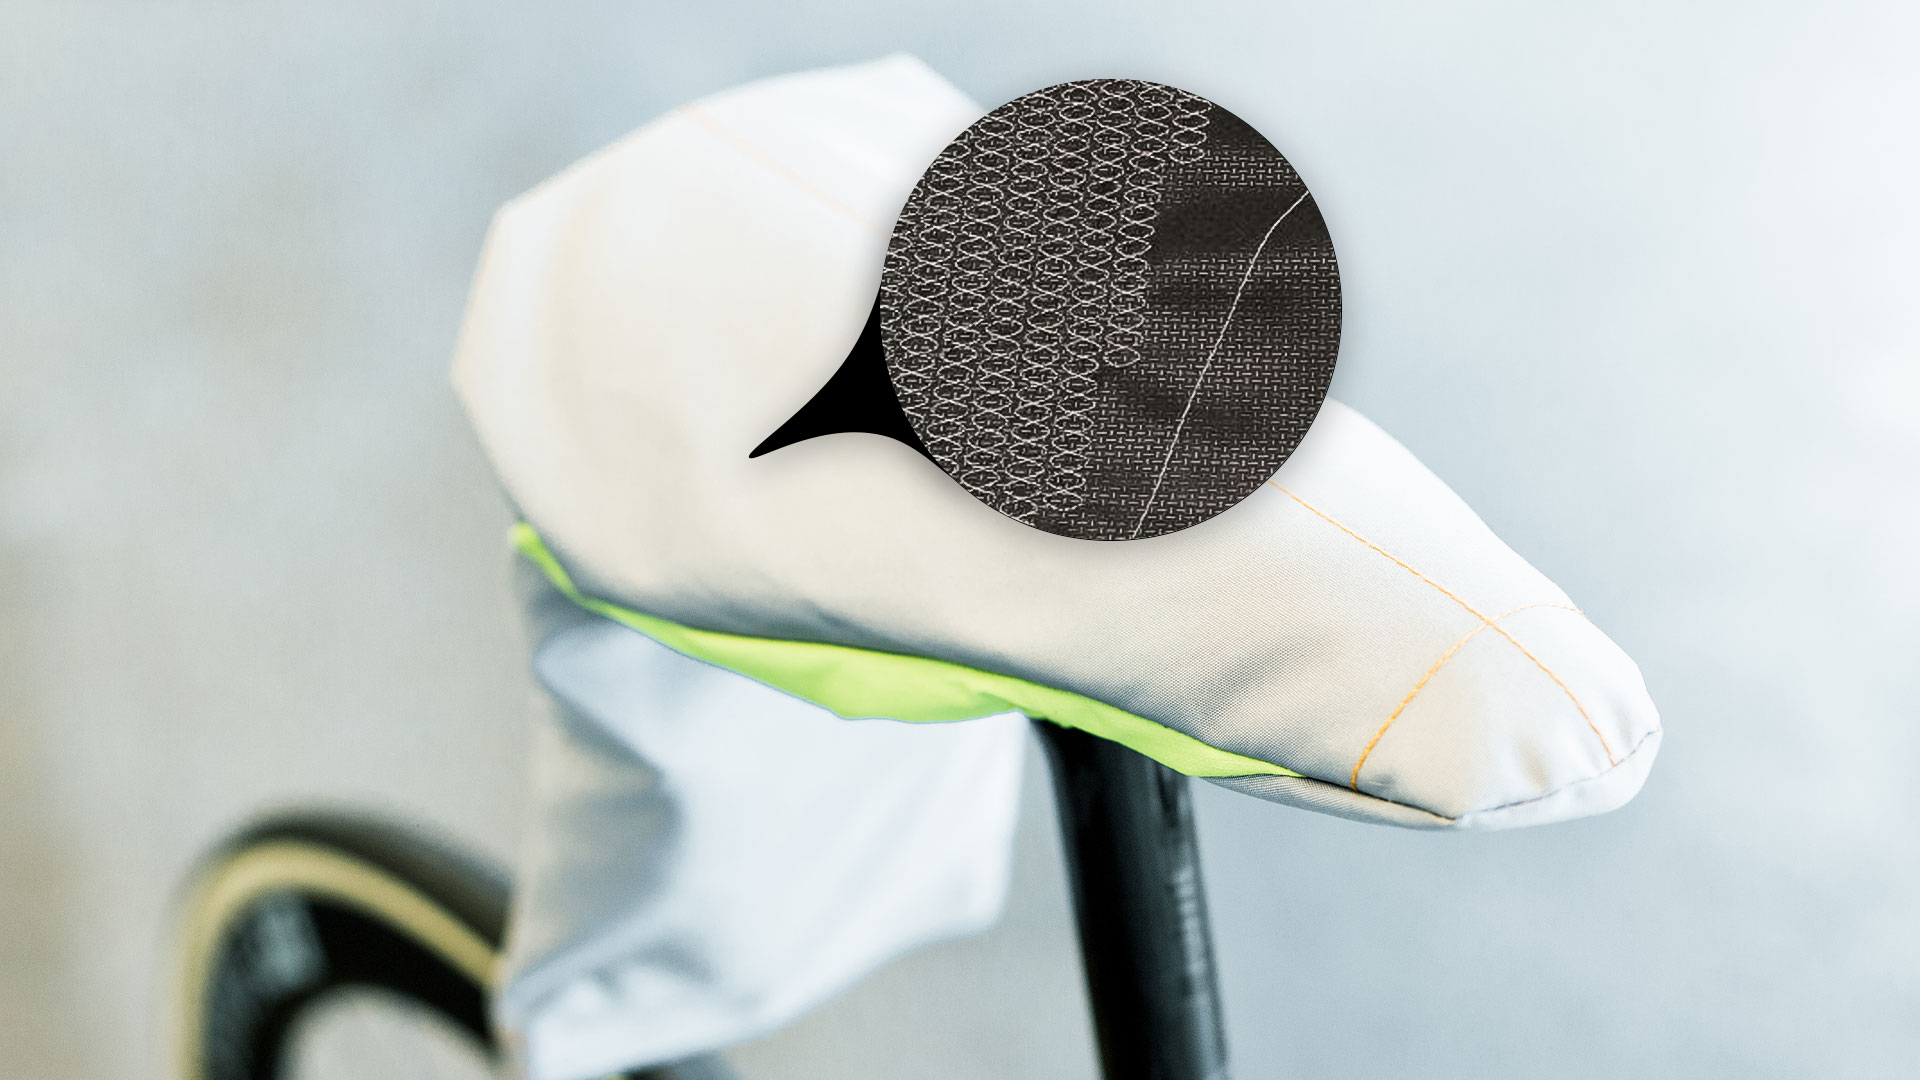 Application example: Textile pressure sensors in cycling